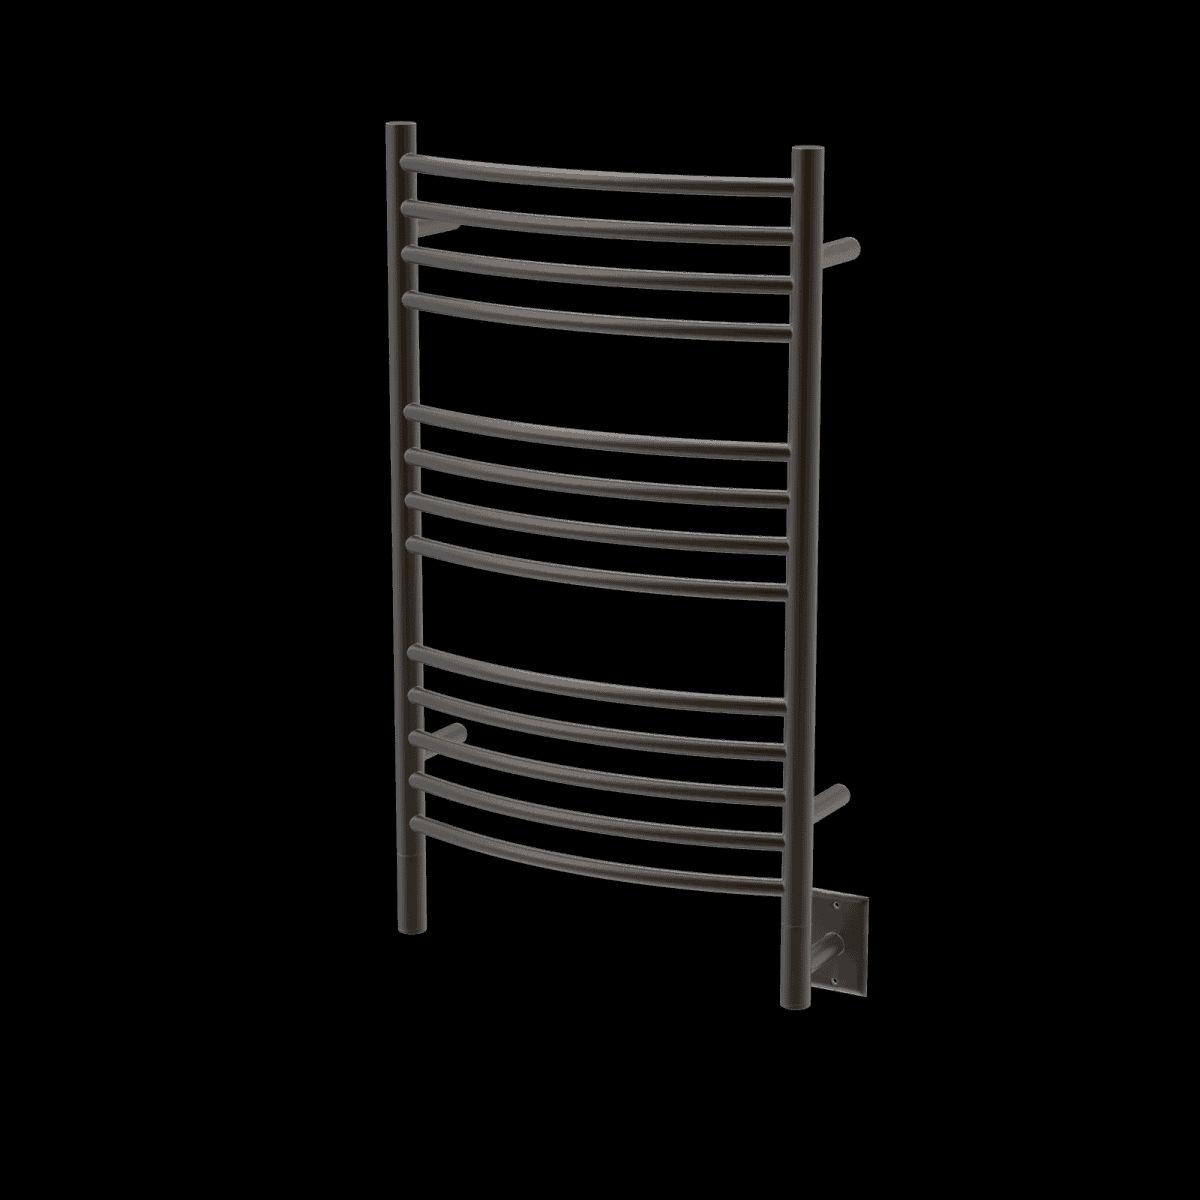 Amba CCO Model C Curved 13 Bar Hardwired Towel Warmer - Oil Rubbed Bronze